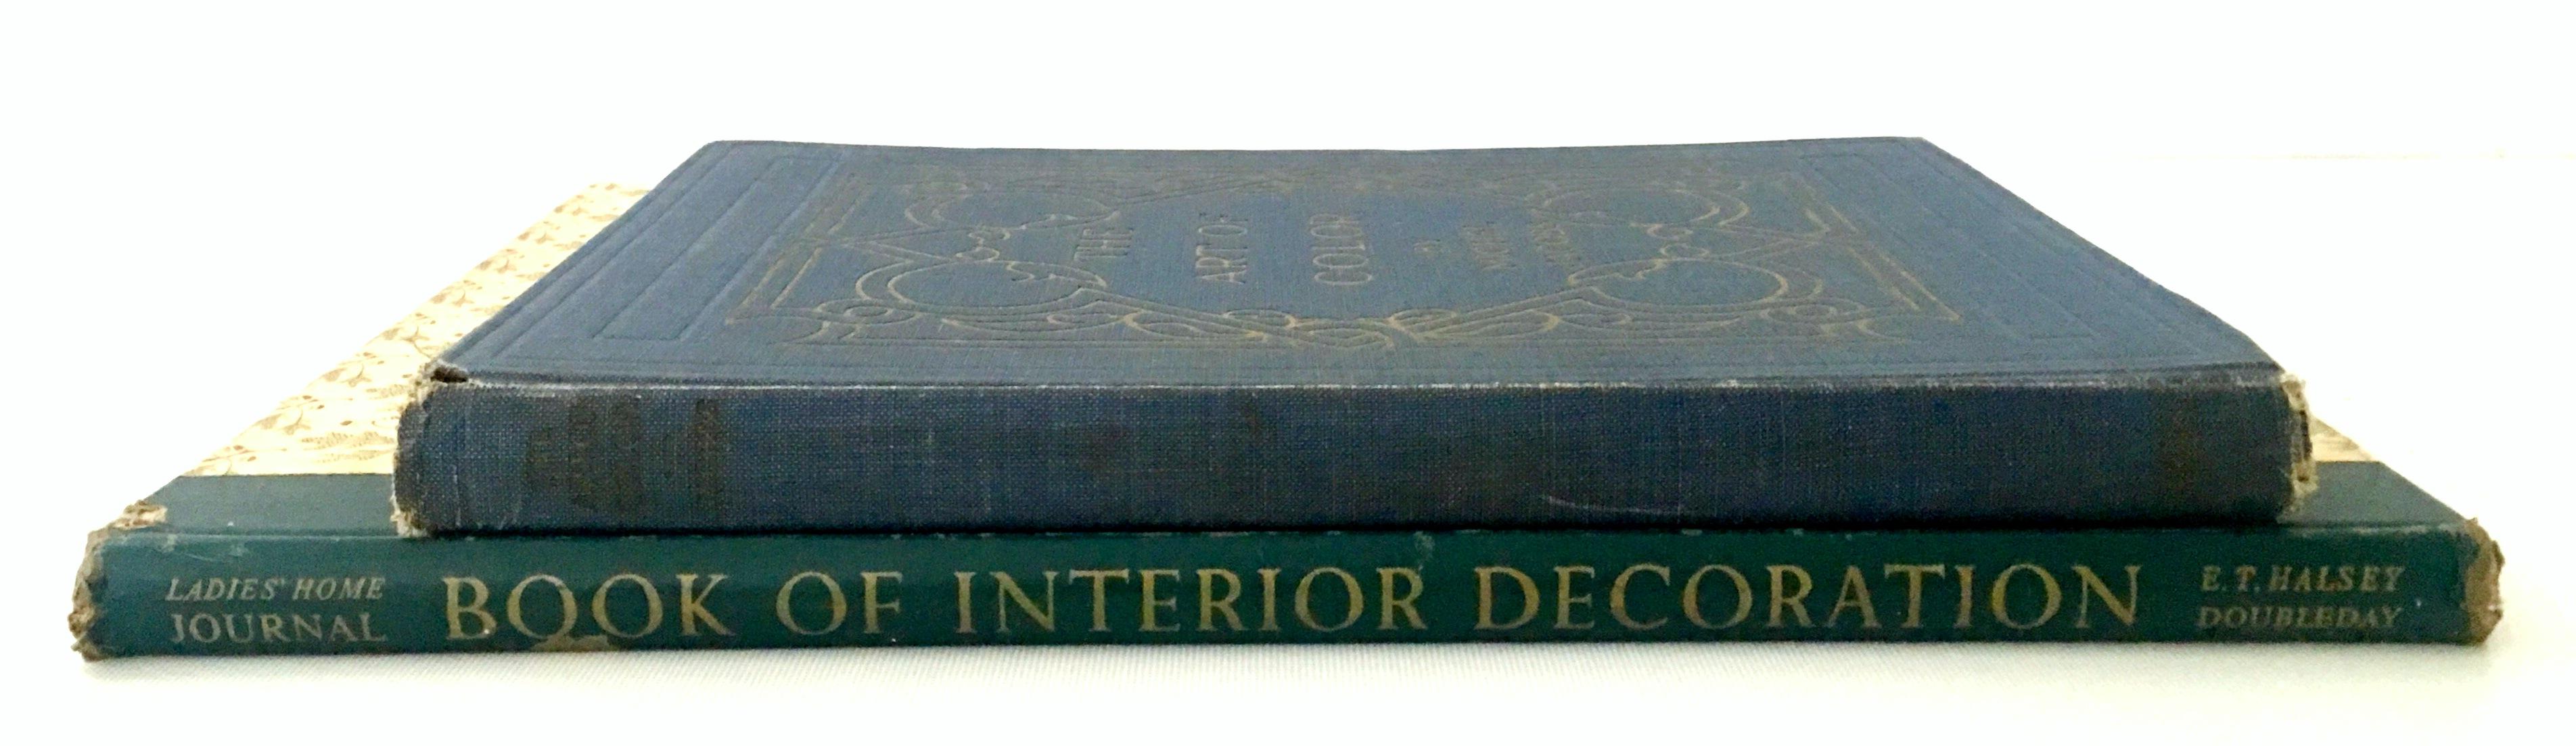 Set o Two Mid-20th Century First Edition Interior design hard cover books. This set of two books features, 1954 first edition of ladies home journal book of interior decoration by, Elizabeth T. Halsey & the 1923 first edition of The Art of color by,